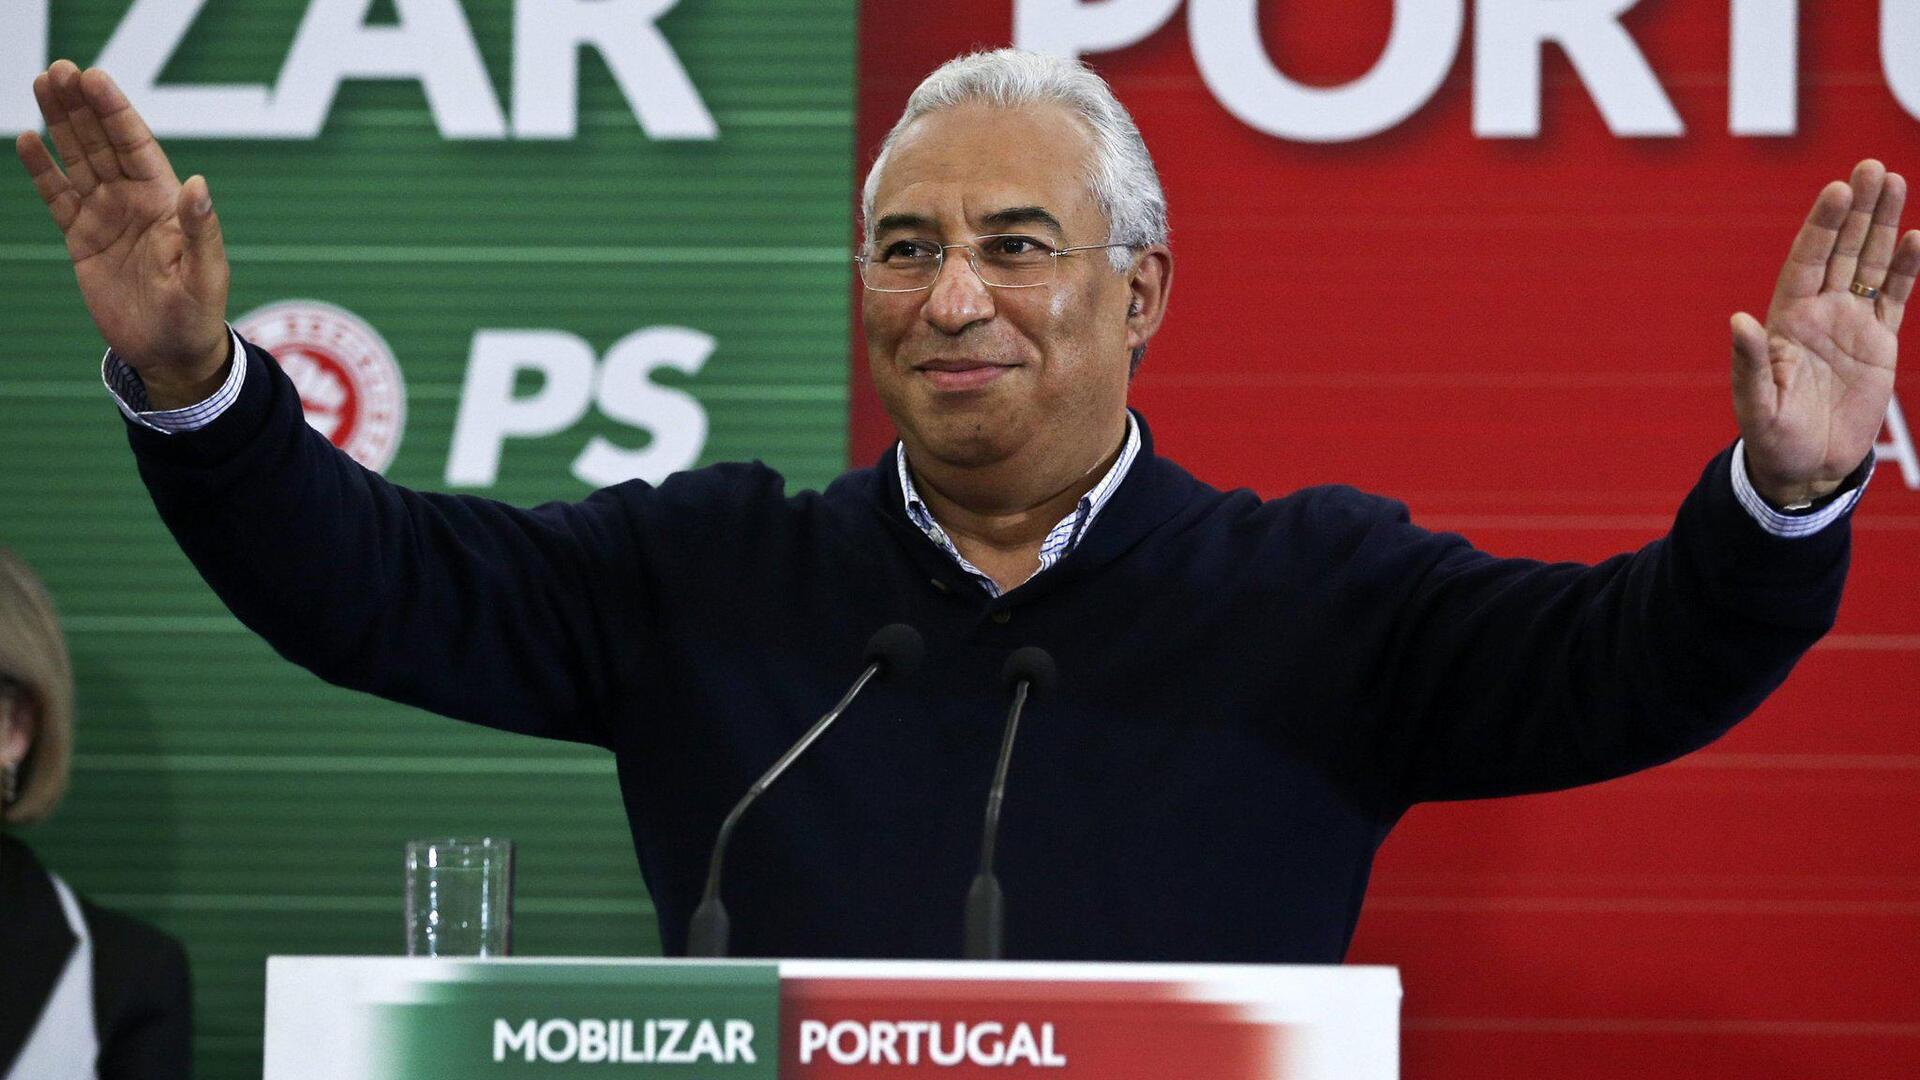 epa04500382 The new Secretary General of the Socialist Party (PS) Antonio Costa on arrival for the press conference after wins the internal elections, at the headquarters of the PS in Lisbon, Portugal, 22 November 2014. Antonio Costa reached the leadership of PS on the day the former Secretary-General of the Socialist Party, Jose Socrates, was interrogated in the Central Criminal Court (TCIC), within the framework of a process in which they investigate suspected crimes of tax evasion, money laundering and corruption. EPA/MANUEL DE ALMEIDA